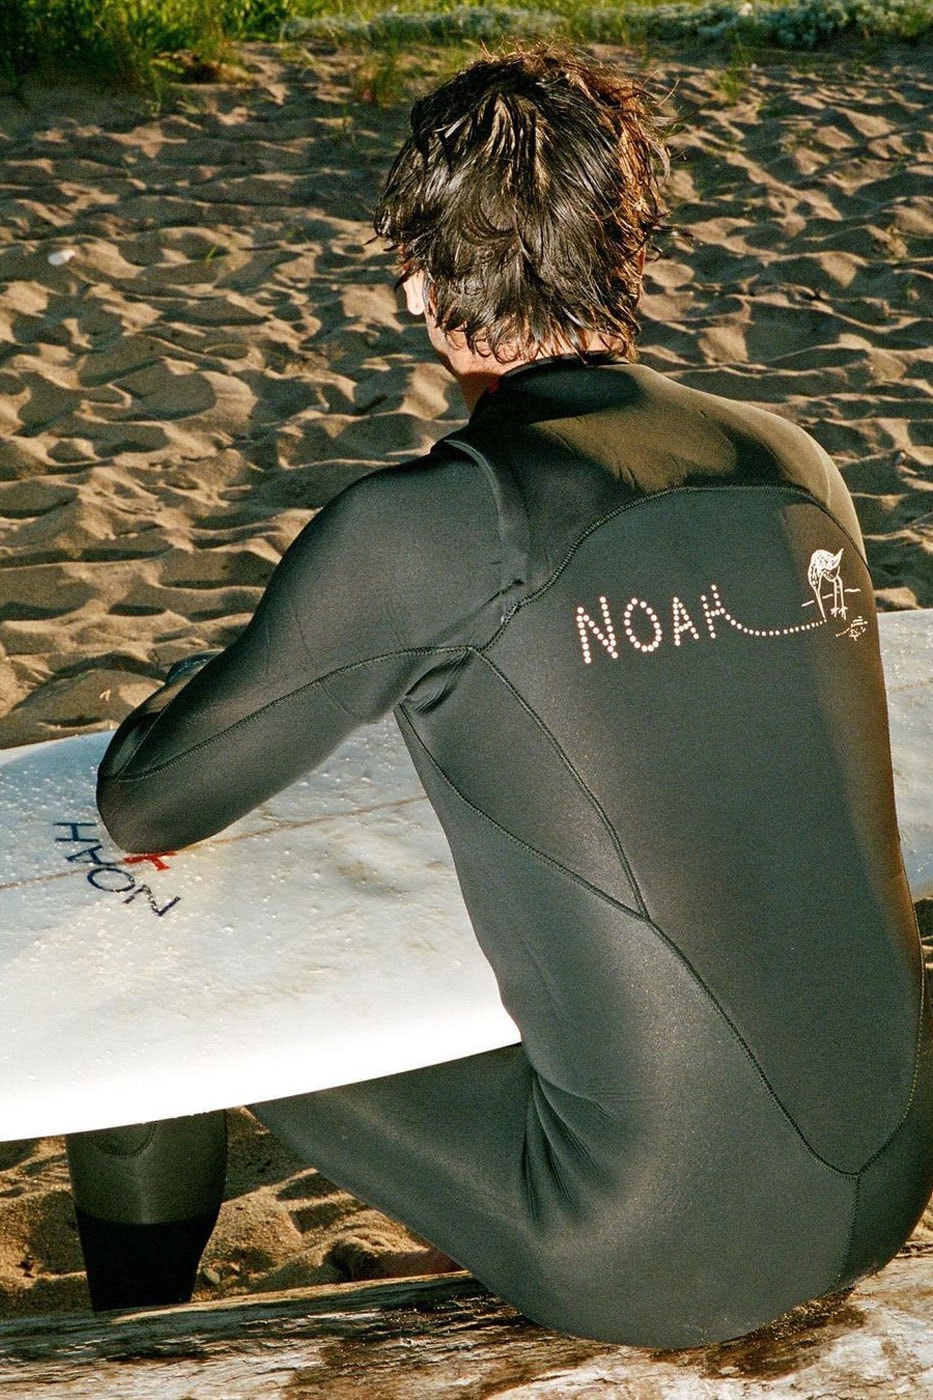 https://image-cdn.hypb.st/https%3A%2F%2Fhypebeast.com%2Fimage%2F2022%2F07%2Fsurf-in-style-with-noahs-sustainable-wetsuits-002.jpg?cbr=1&q=90